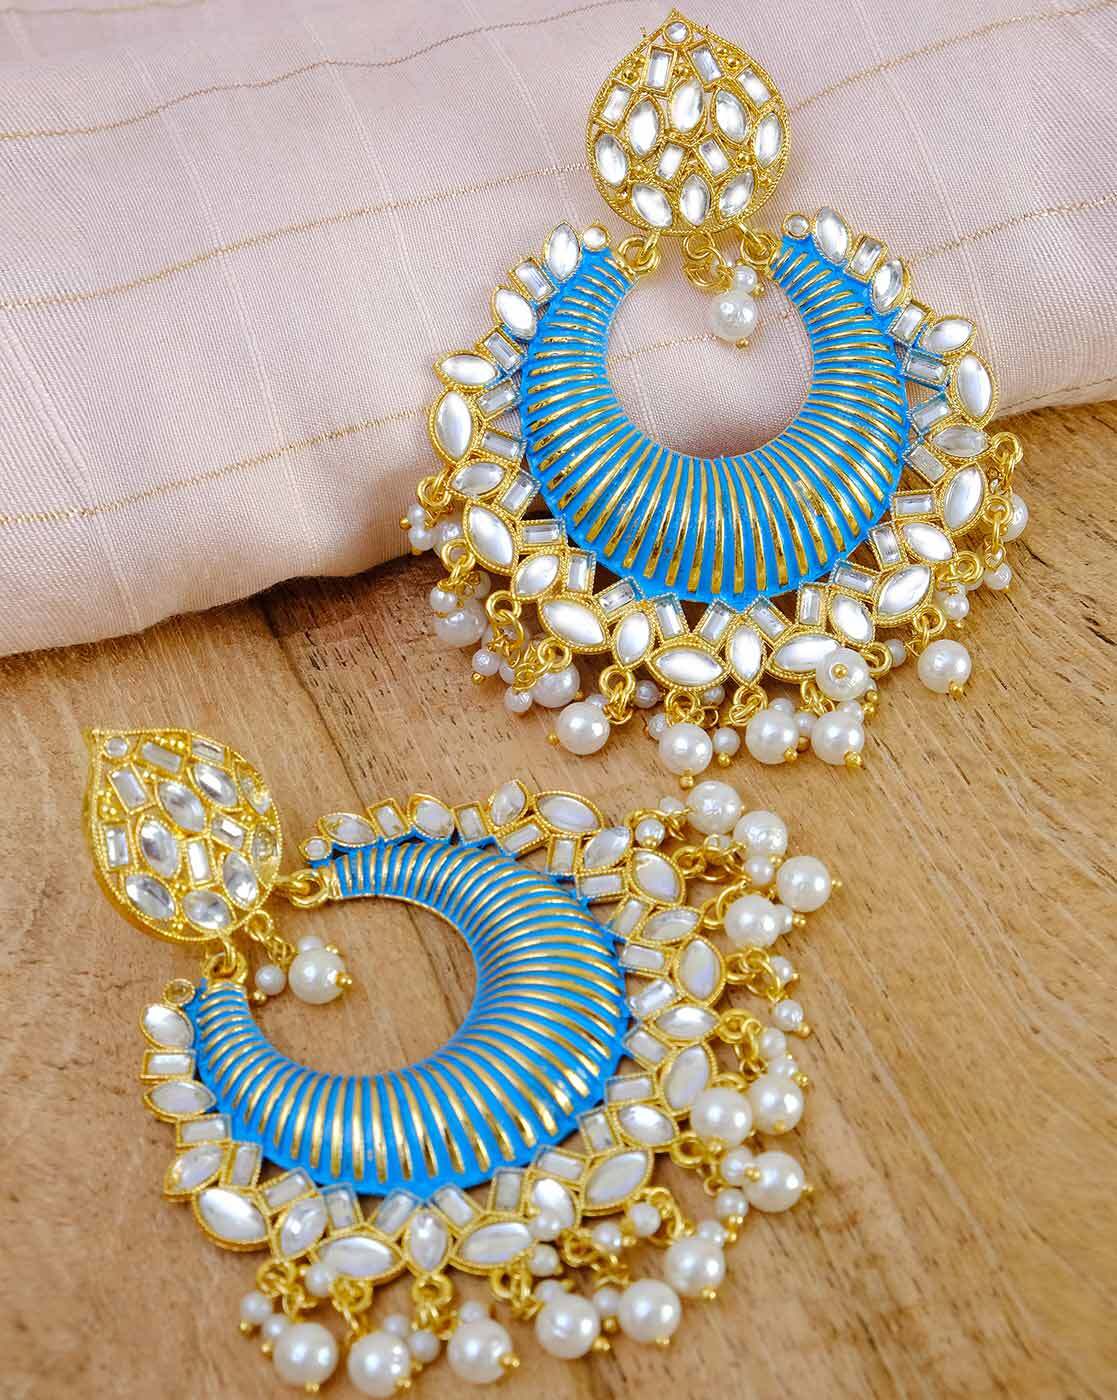 Buy Fashion Frill Exclusively Pearl Floral Designs Gold Plated Jhumka  Earrings For Girls Women Stylish Latest Fancy Earrings (Beige) at Amazon.in